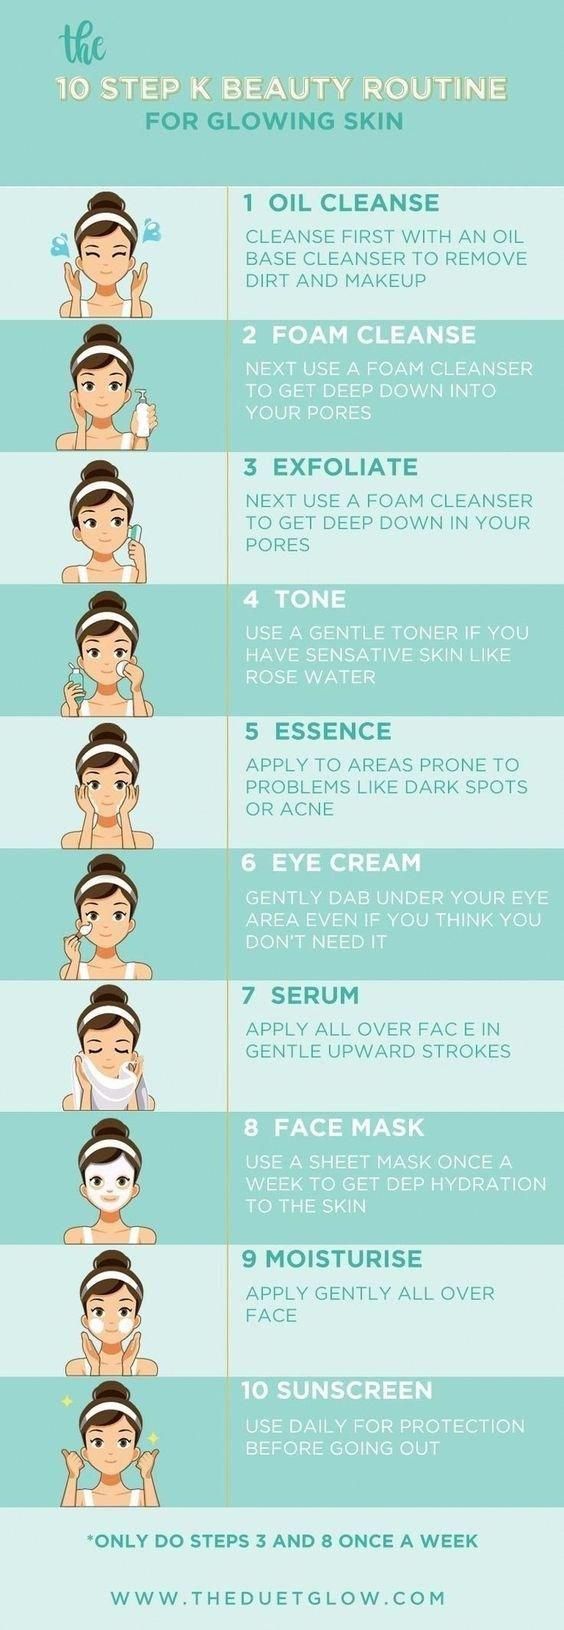 16 Skincare Cheat Sheets That Are Actually Useful - 16 Skincare Cheat Sheets That Are Actually Useful -   18 diy Beauty routine ideas